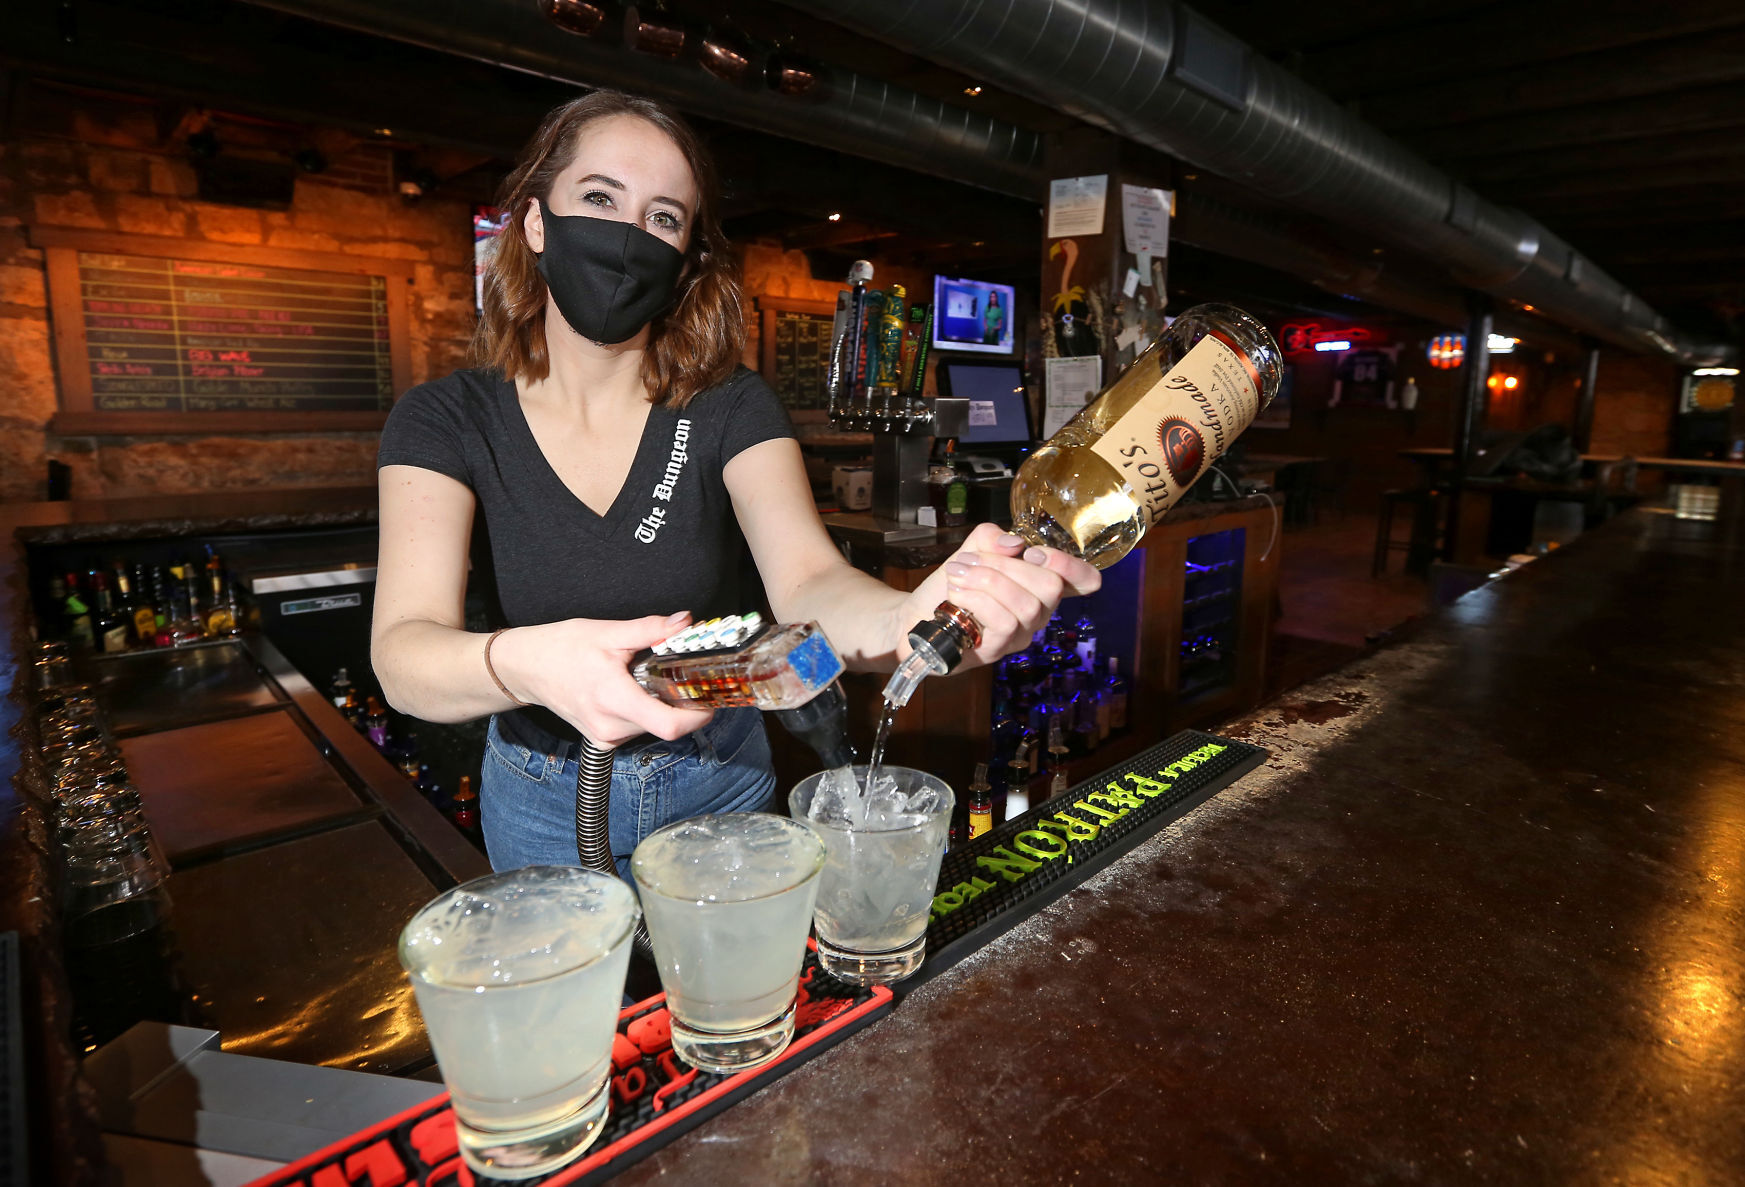 Sarah Knabel, a bartender at The Dungeon in downtown Dubuque, works at the bar on Monday. The business reopened on Thursday. PHOTO CREDIT: JESSICA REILLY